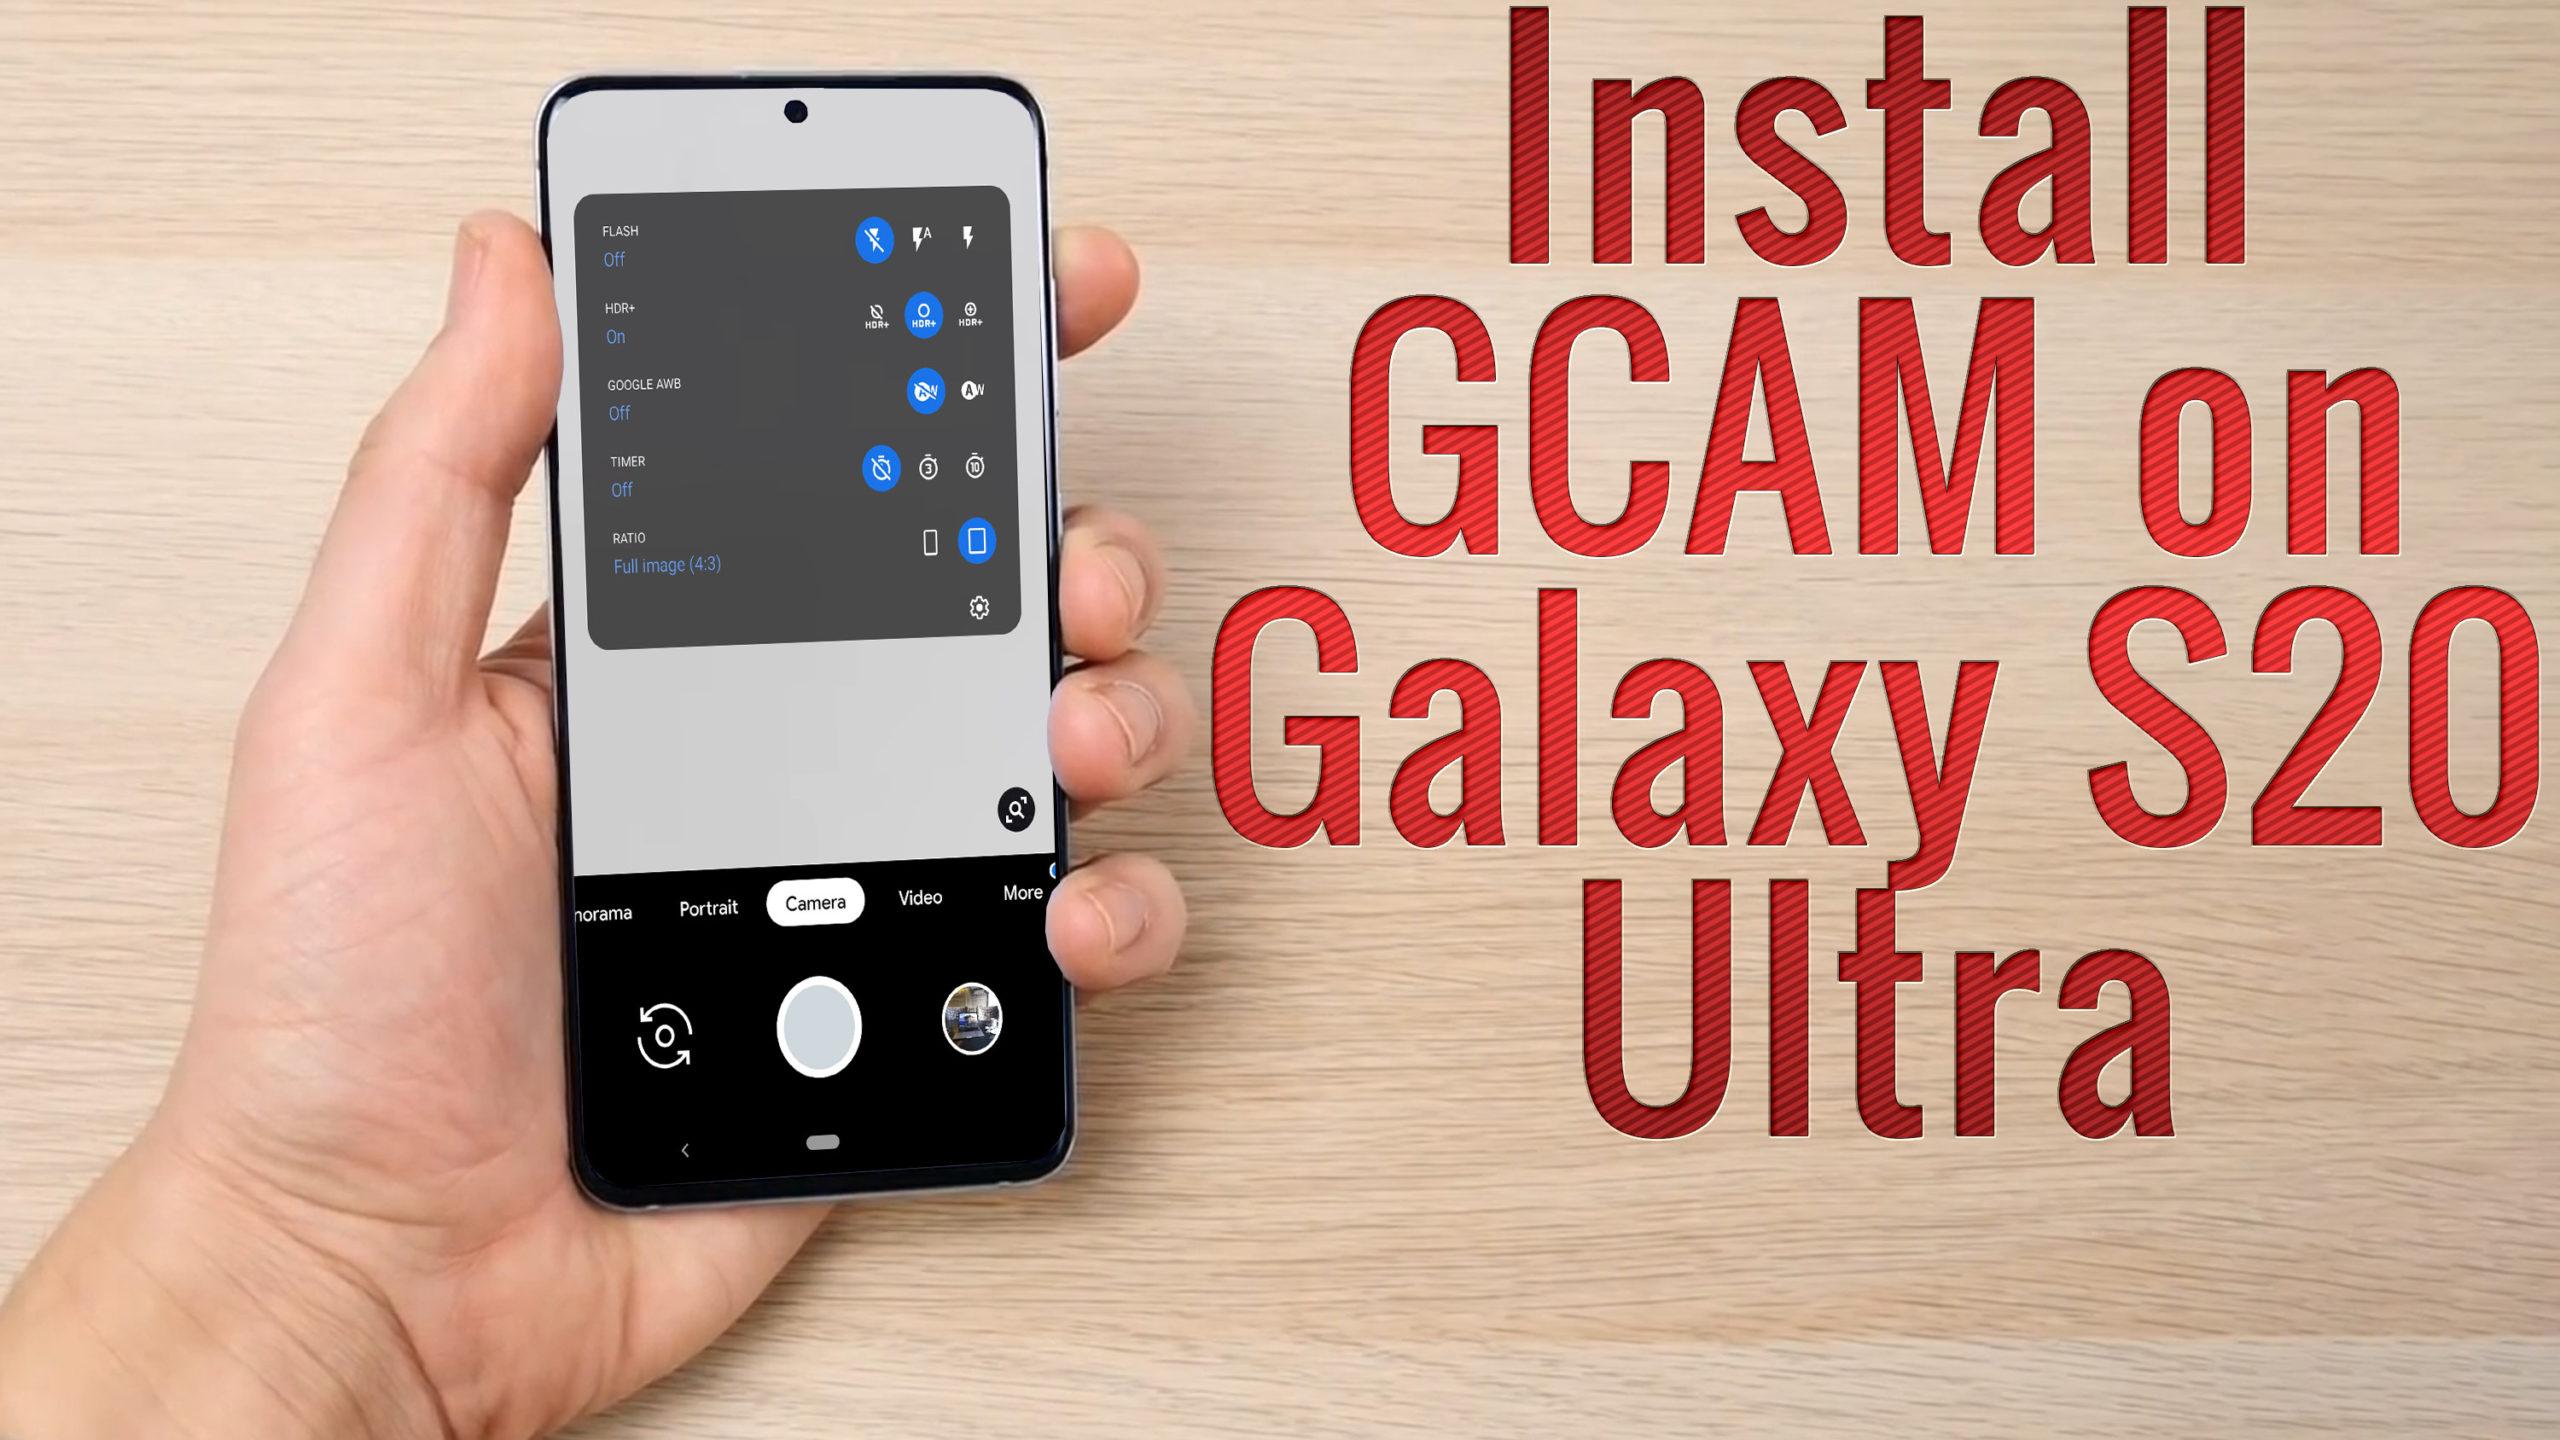 Download GCAM(Google Camera) Port for Samsung Galaxy Note10+ in